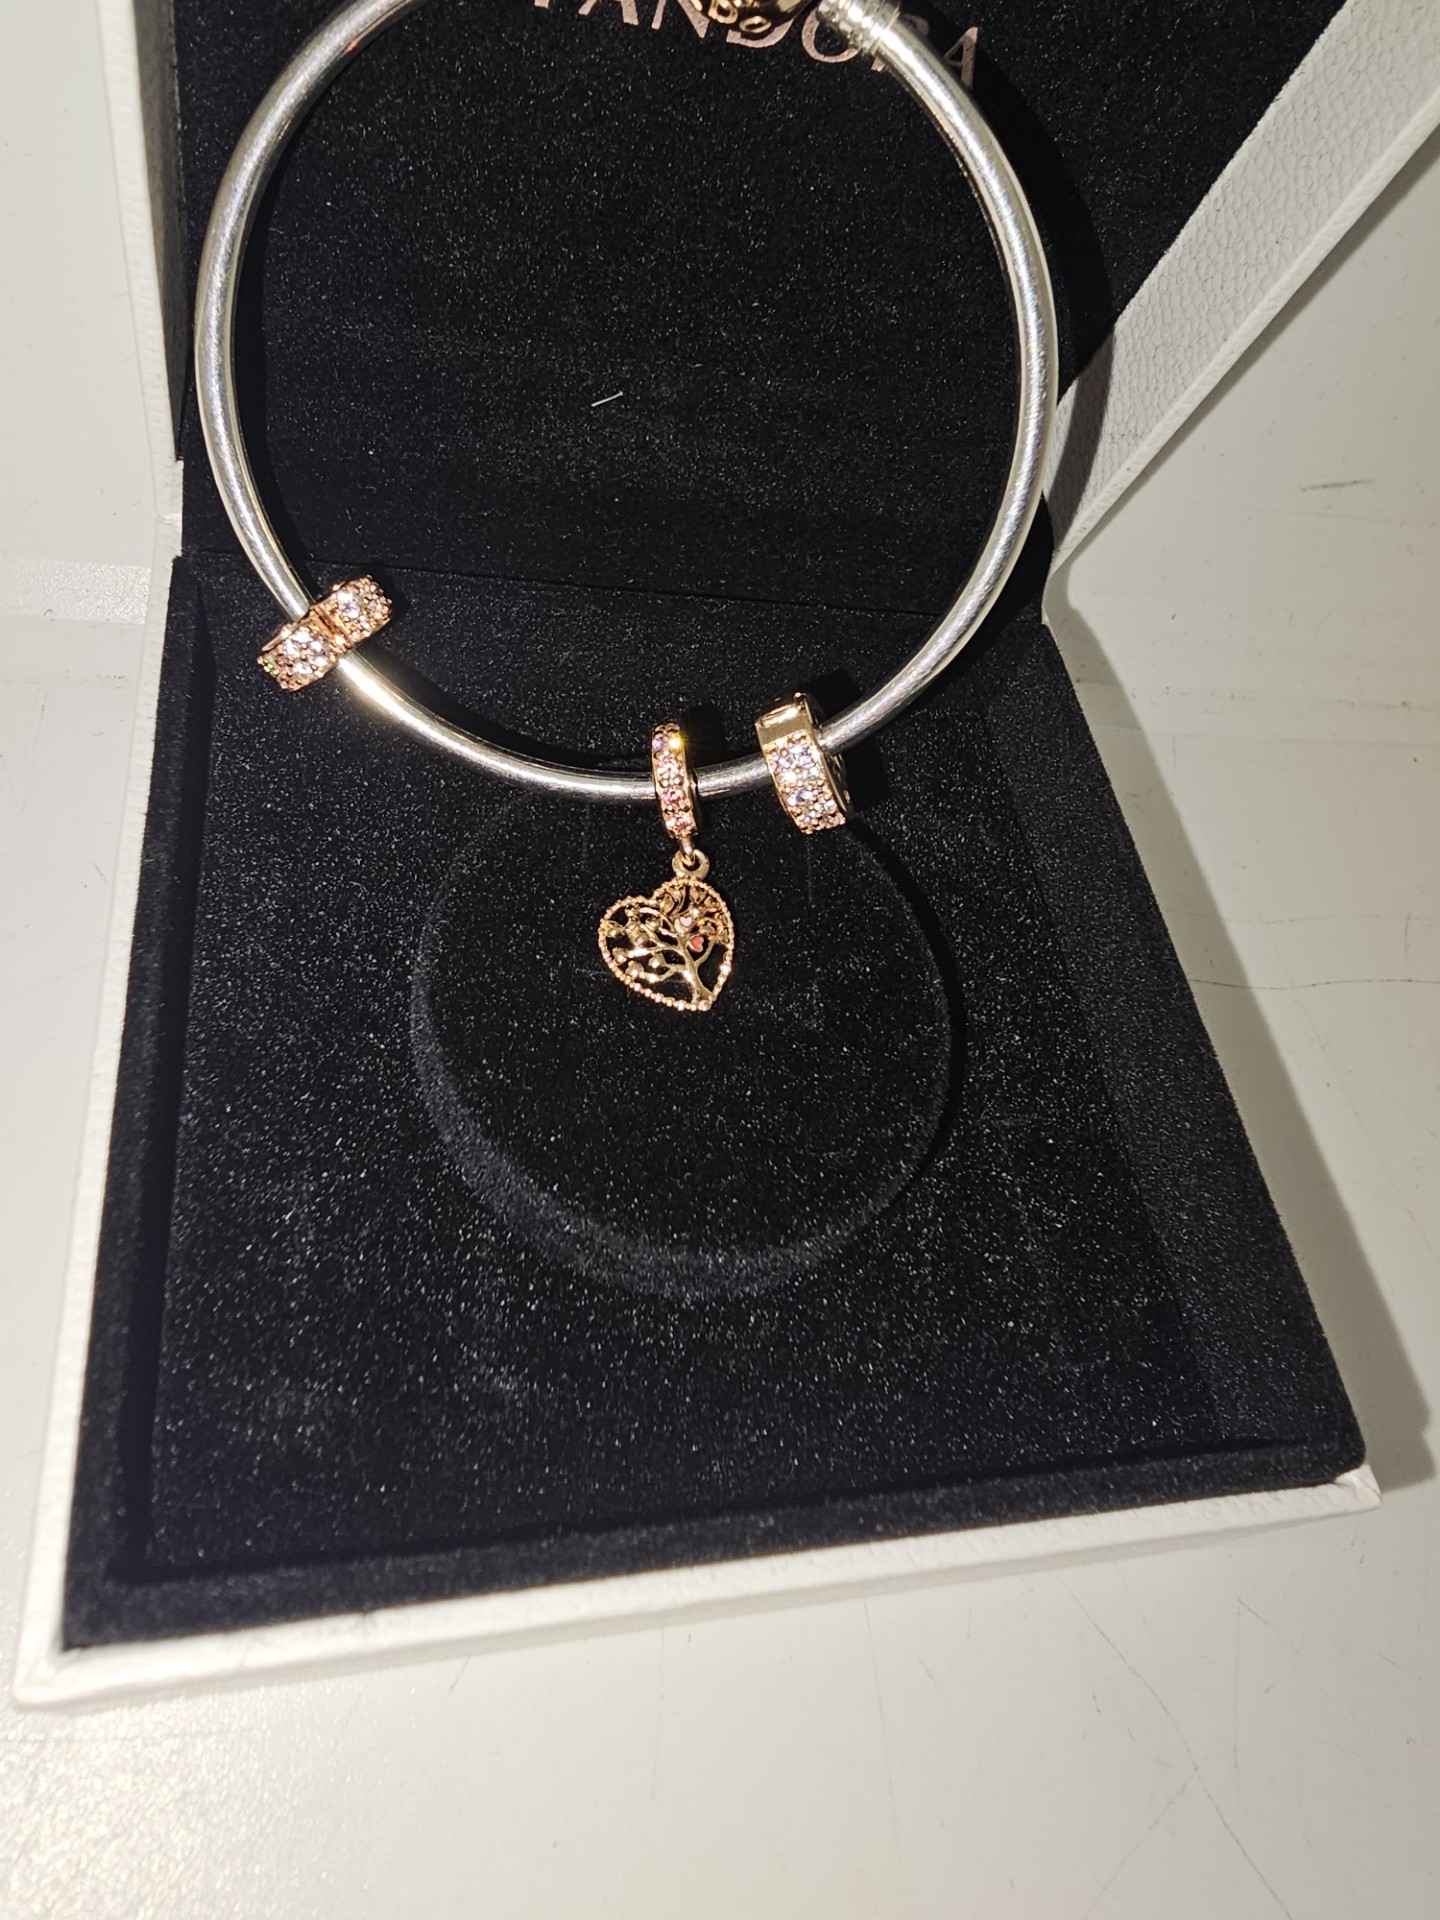 Pandora Bracelet with 3 Charms - boxed